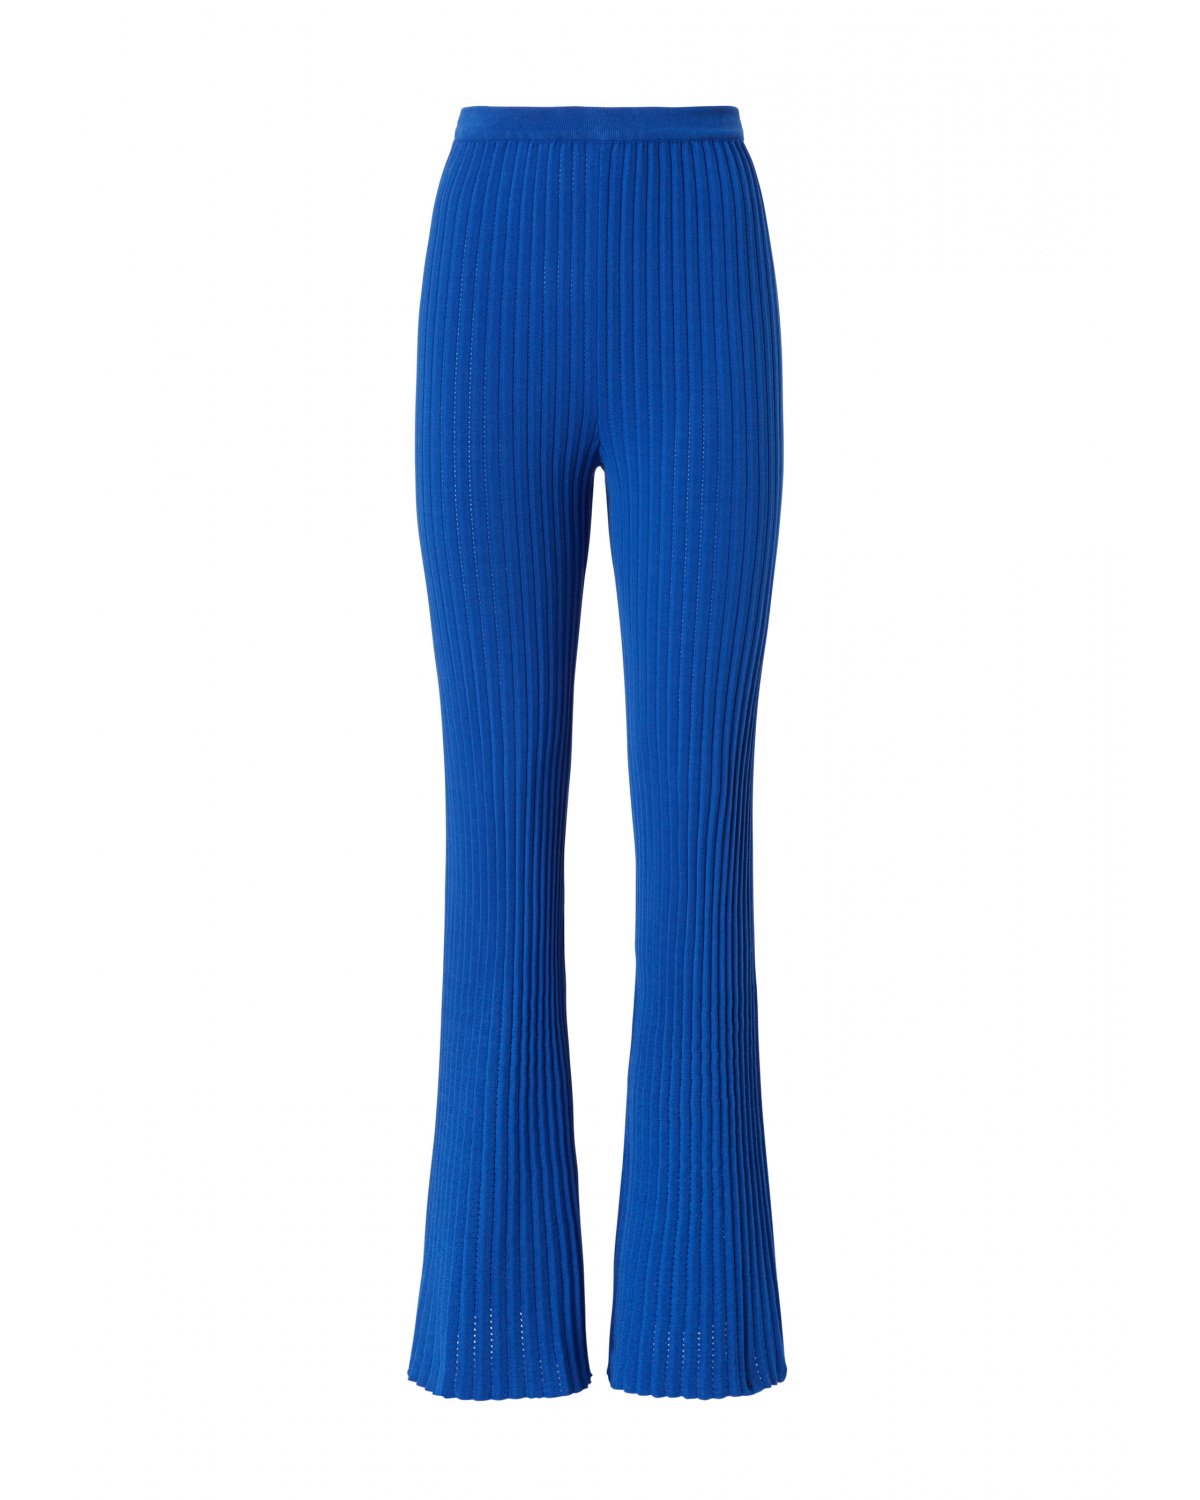 Blue pleated knitted trousers | 73_74, Mid season sale -40%, Summer Sale | Genny